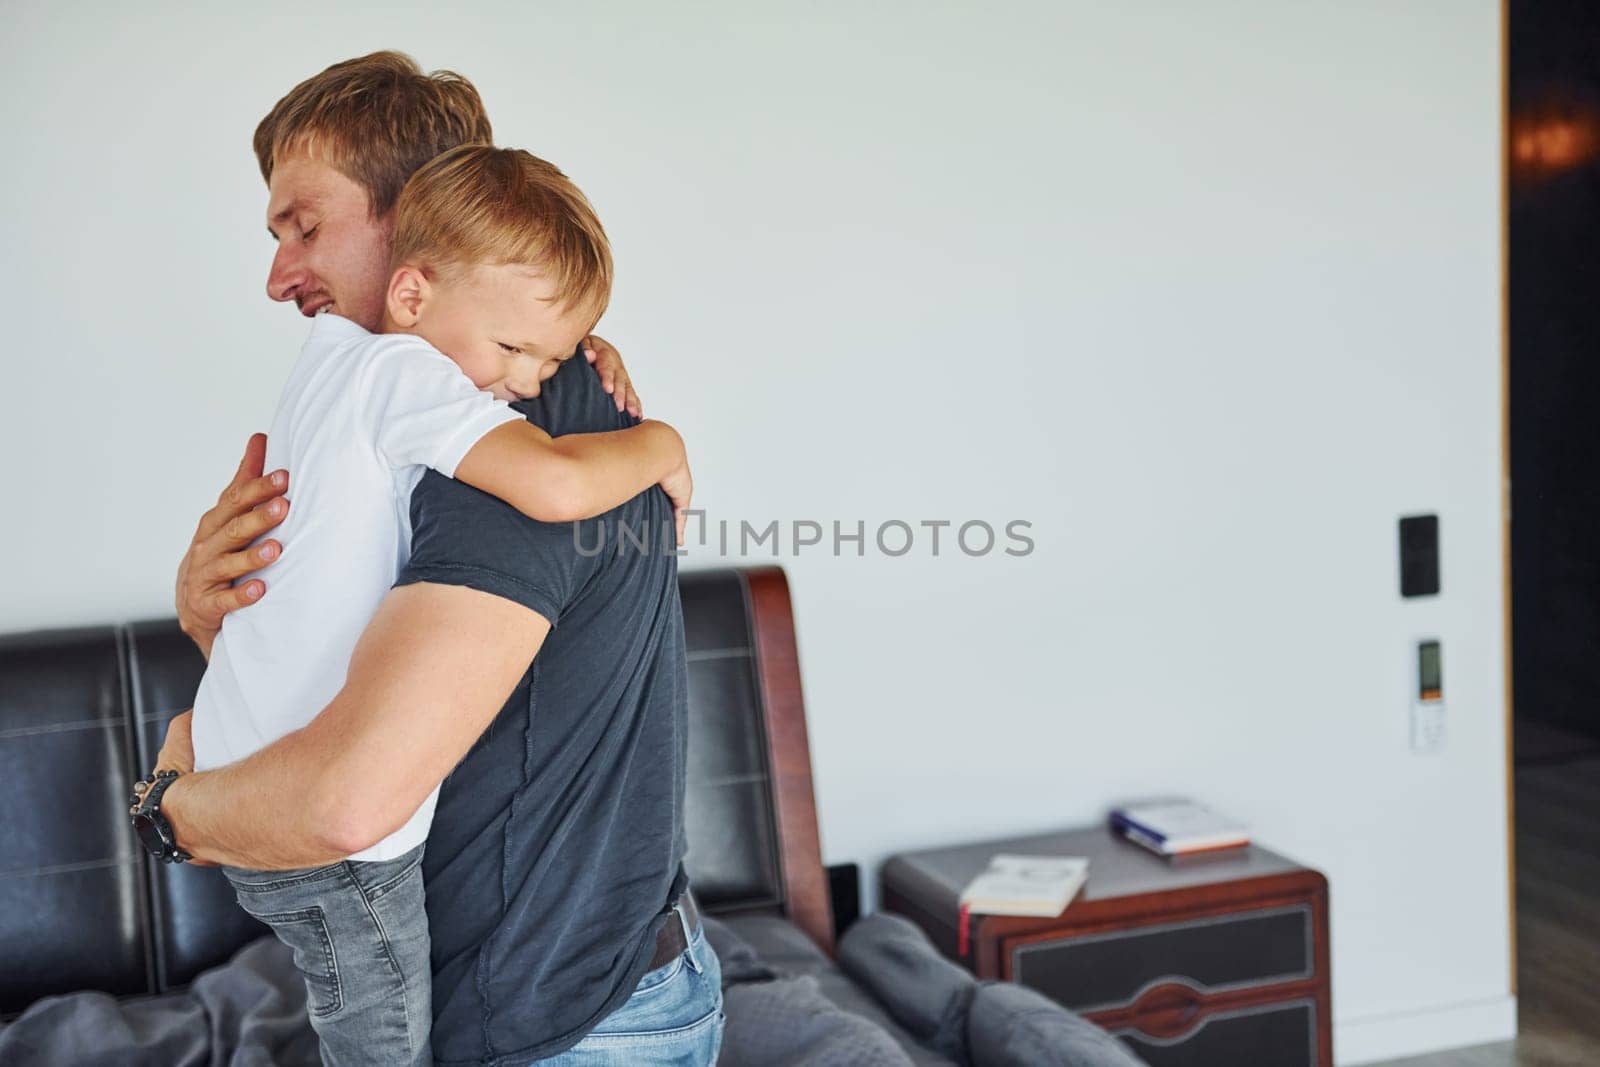 Embracing each other. Father and son is indoors at home together.